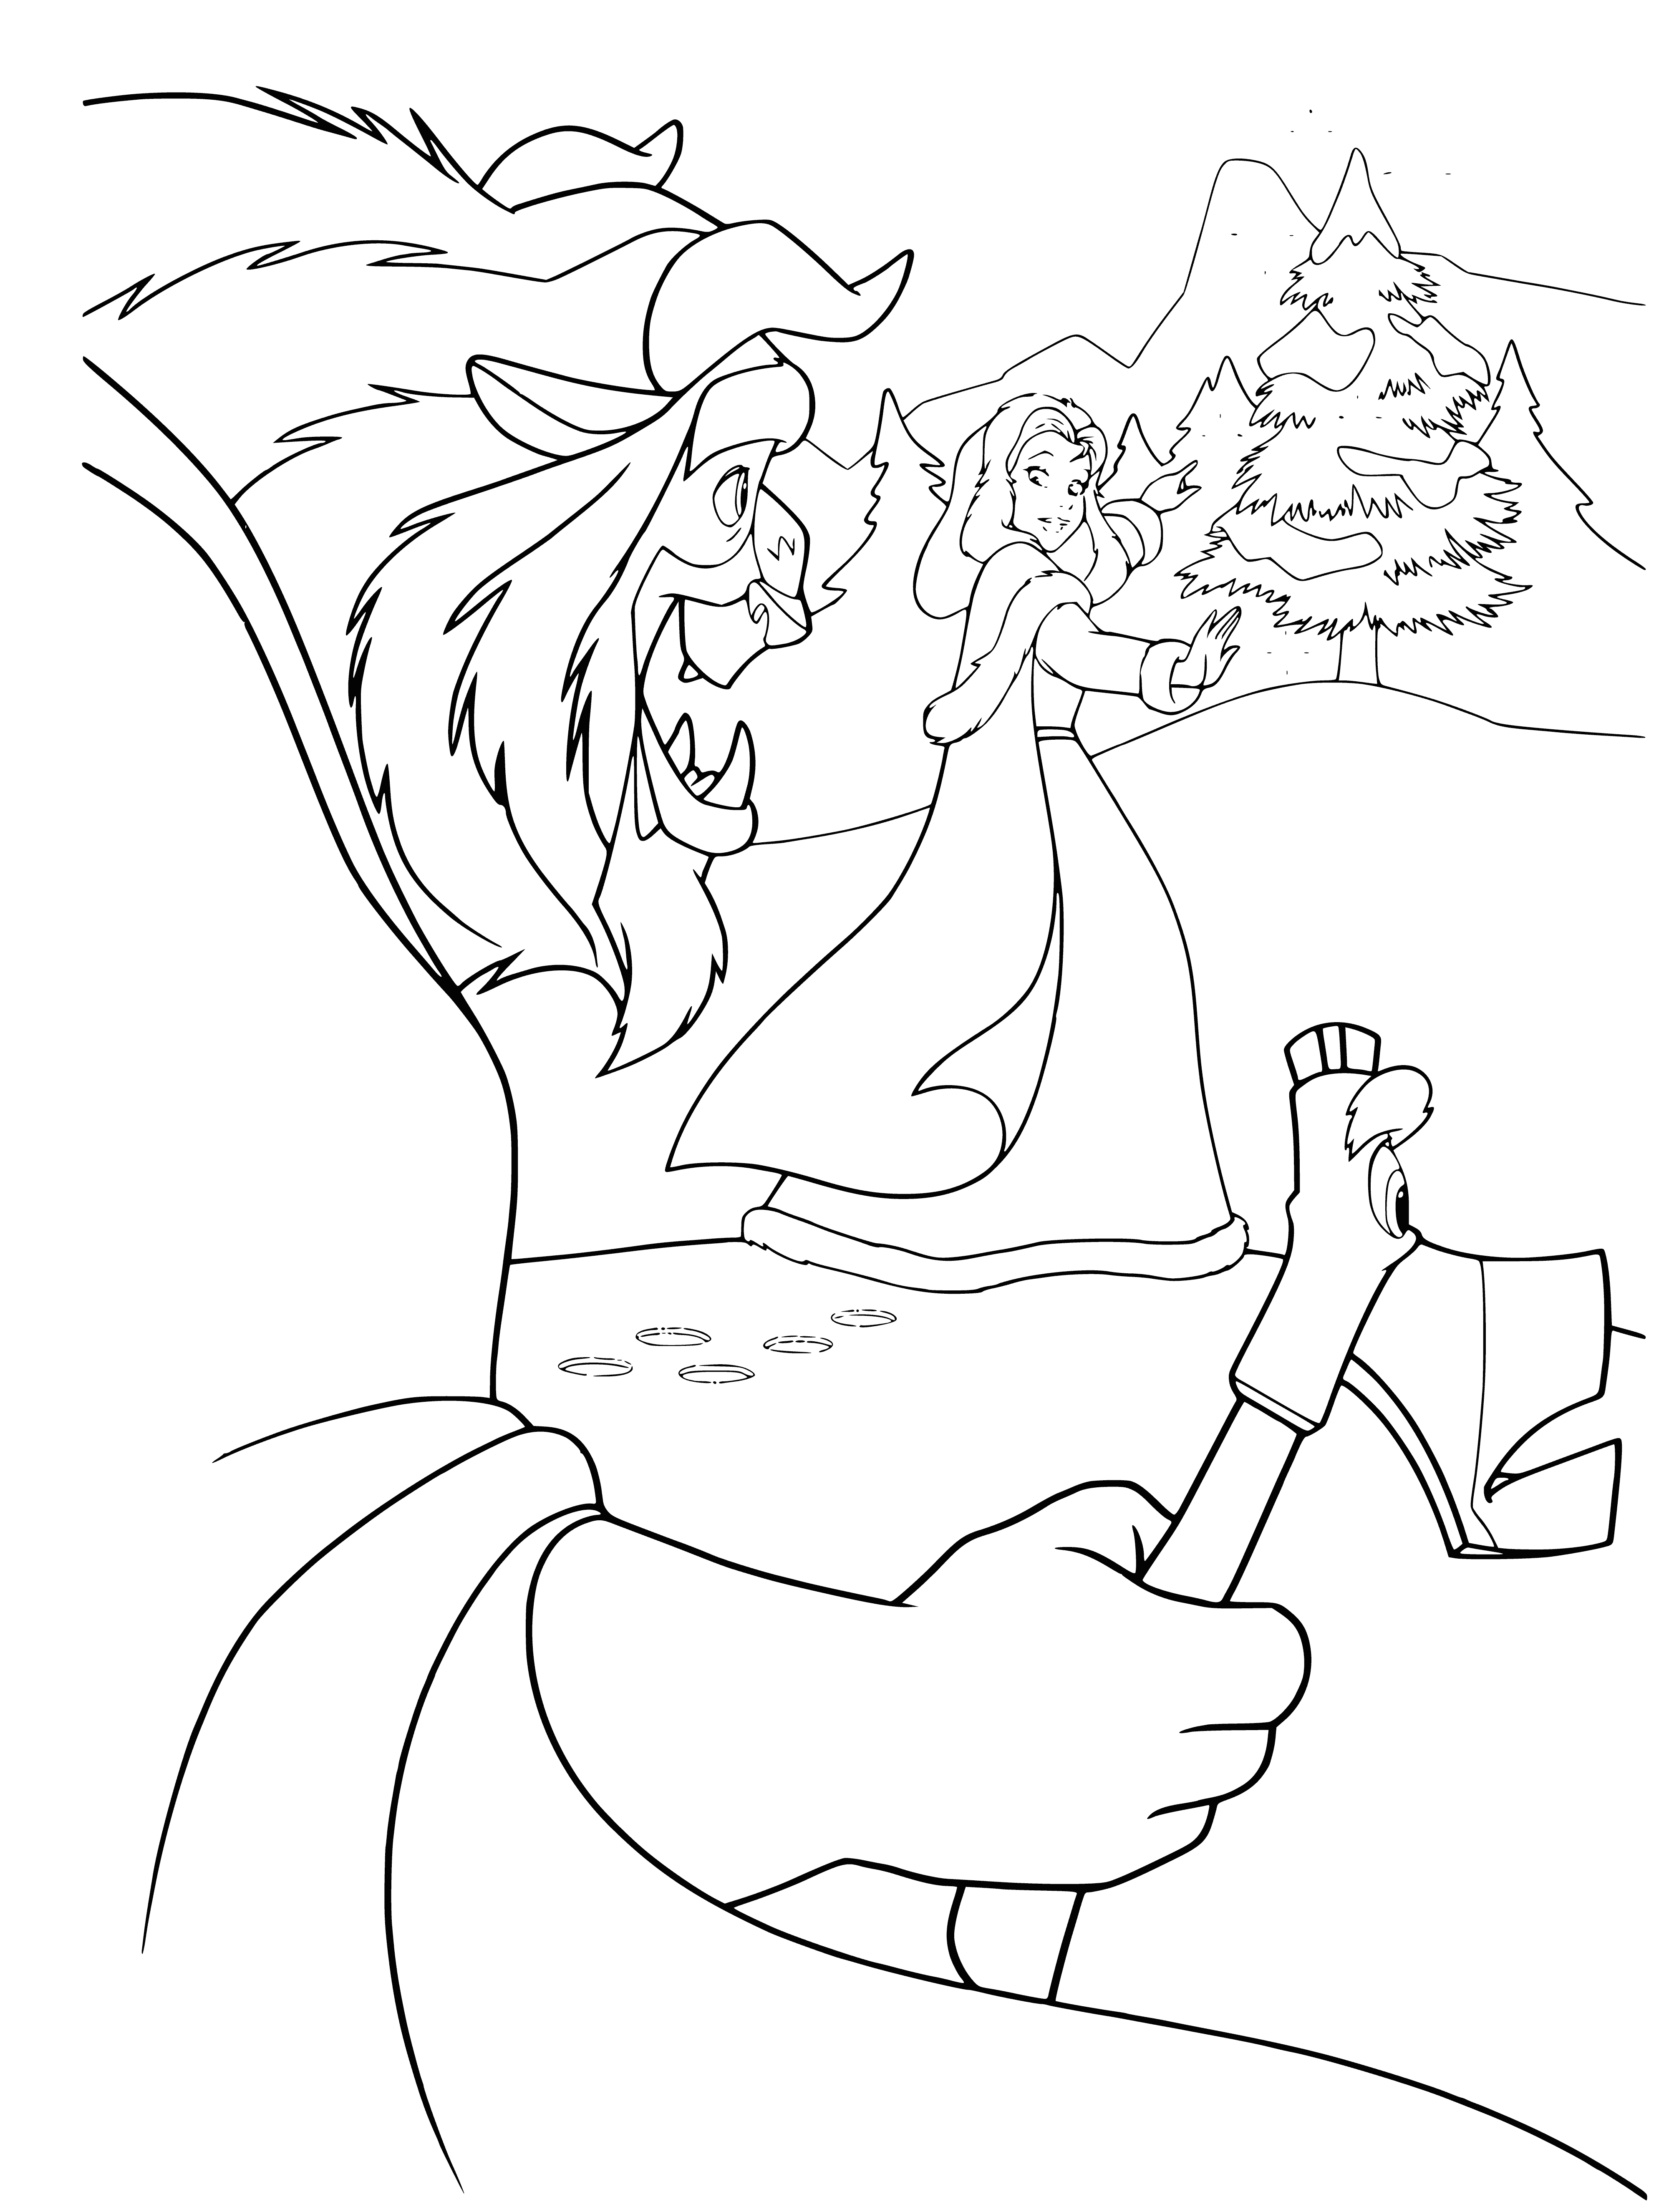 Winter tree in the forest coloring page